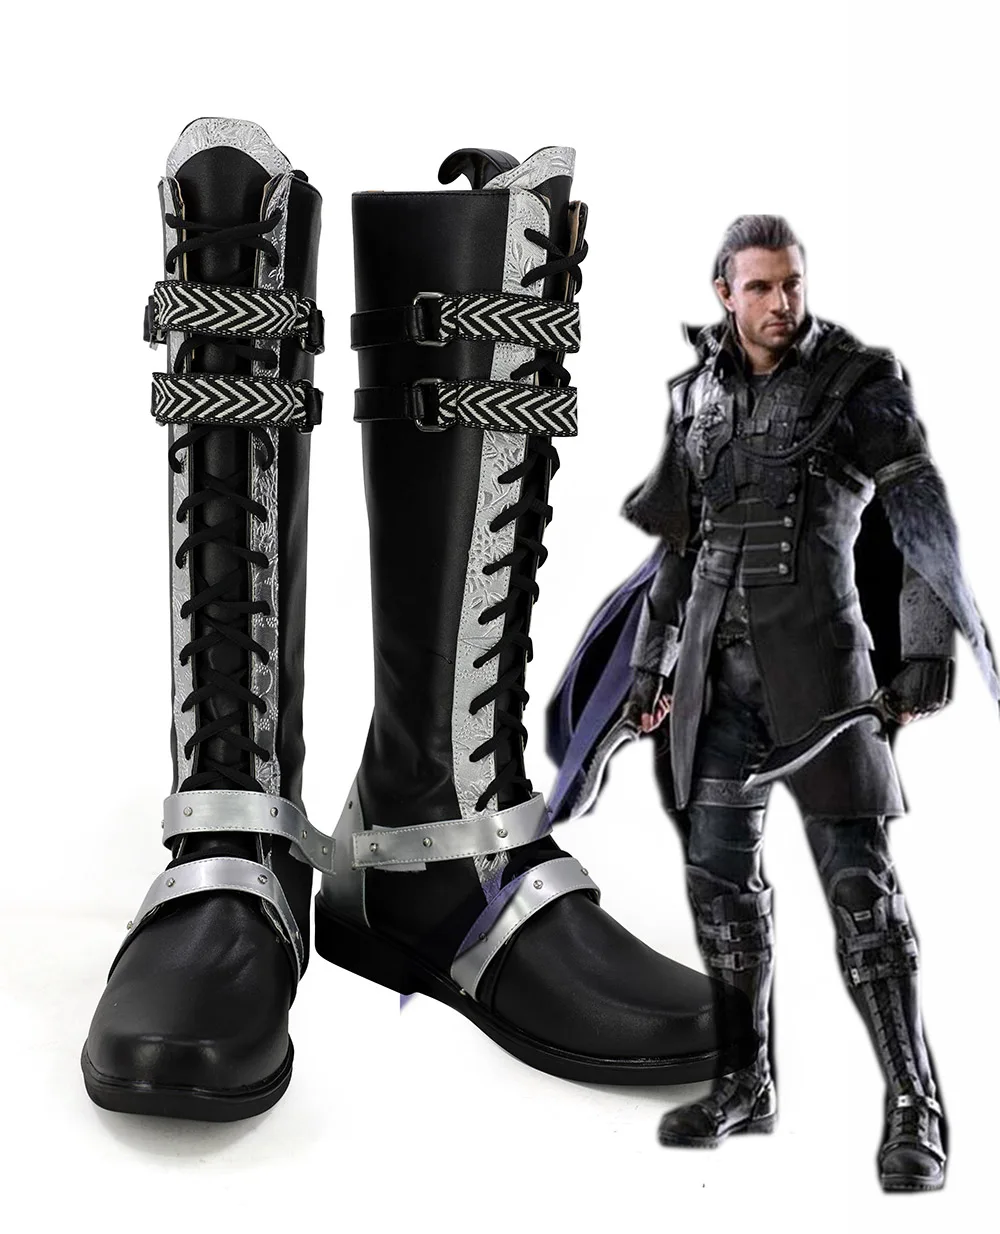 nyx-ulrick-–-bottes-longues-pour-cosplay-final-fantasy-xv-ff15-maquillage-d'halloween-sur-mesure